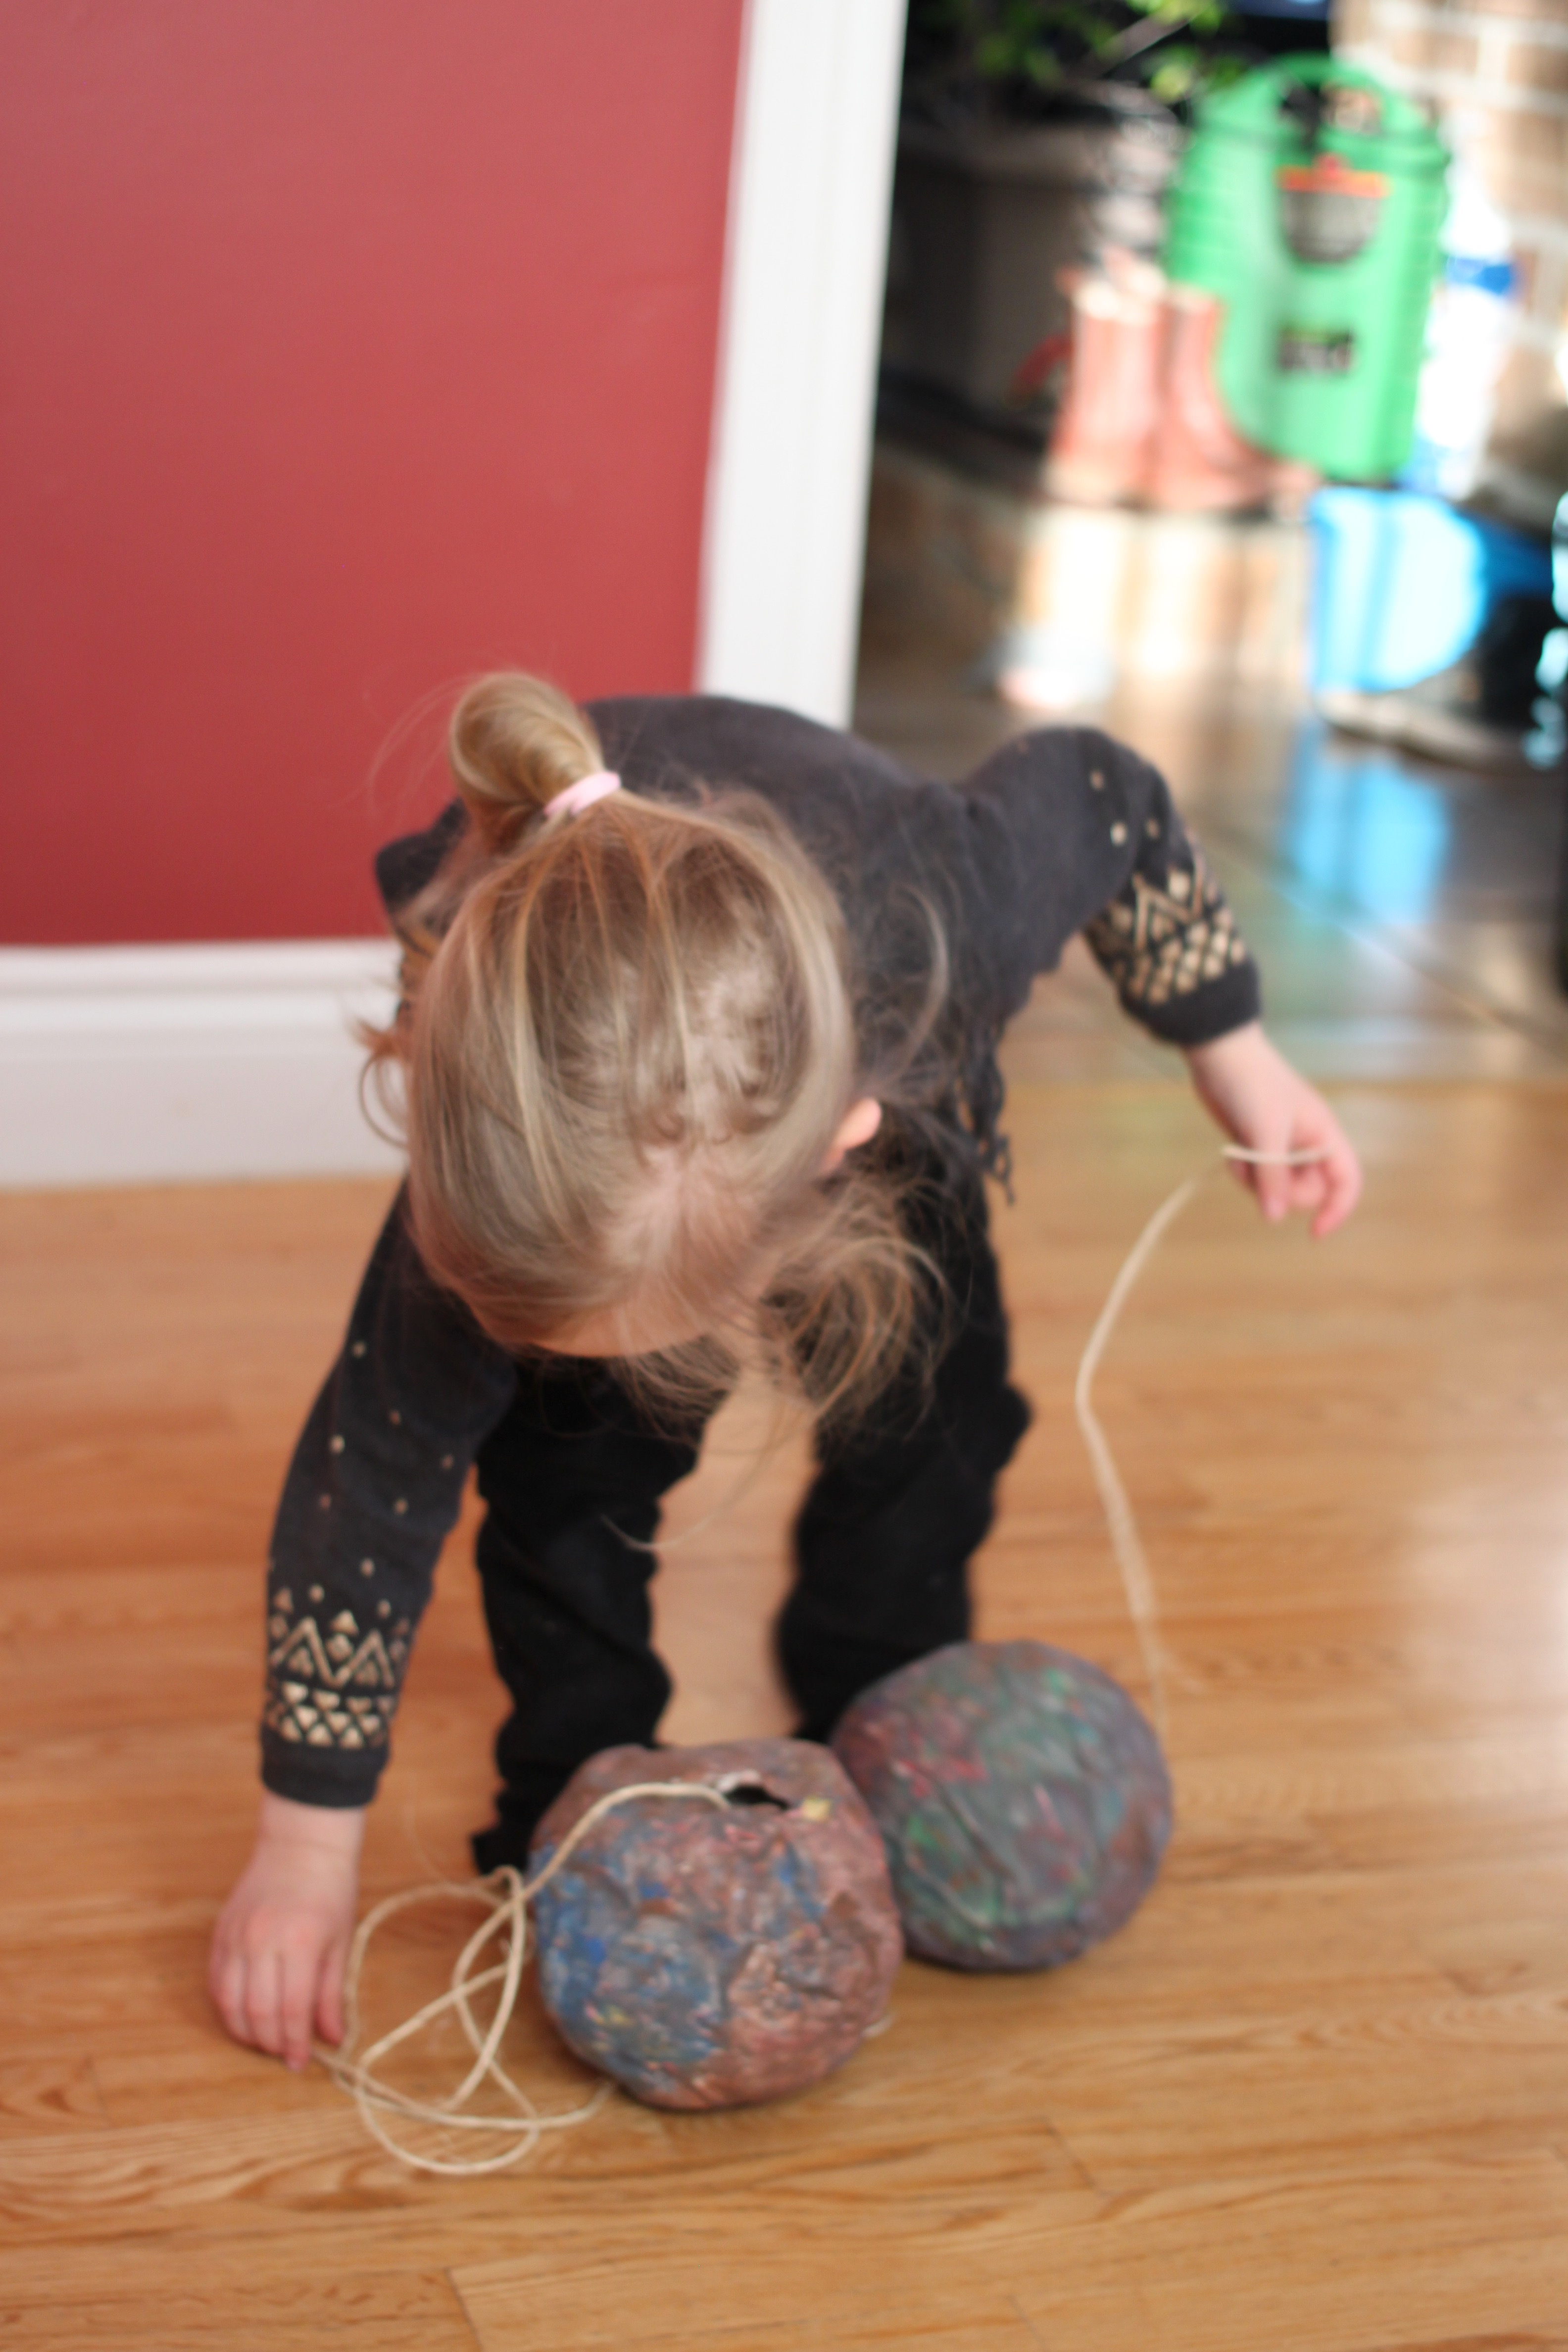 A young girl is picking up a string from the ground, attached to a paper mâché asteroid. She holds another string with another asteroid in her other hand